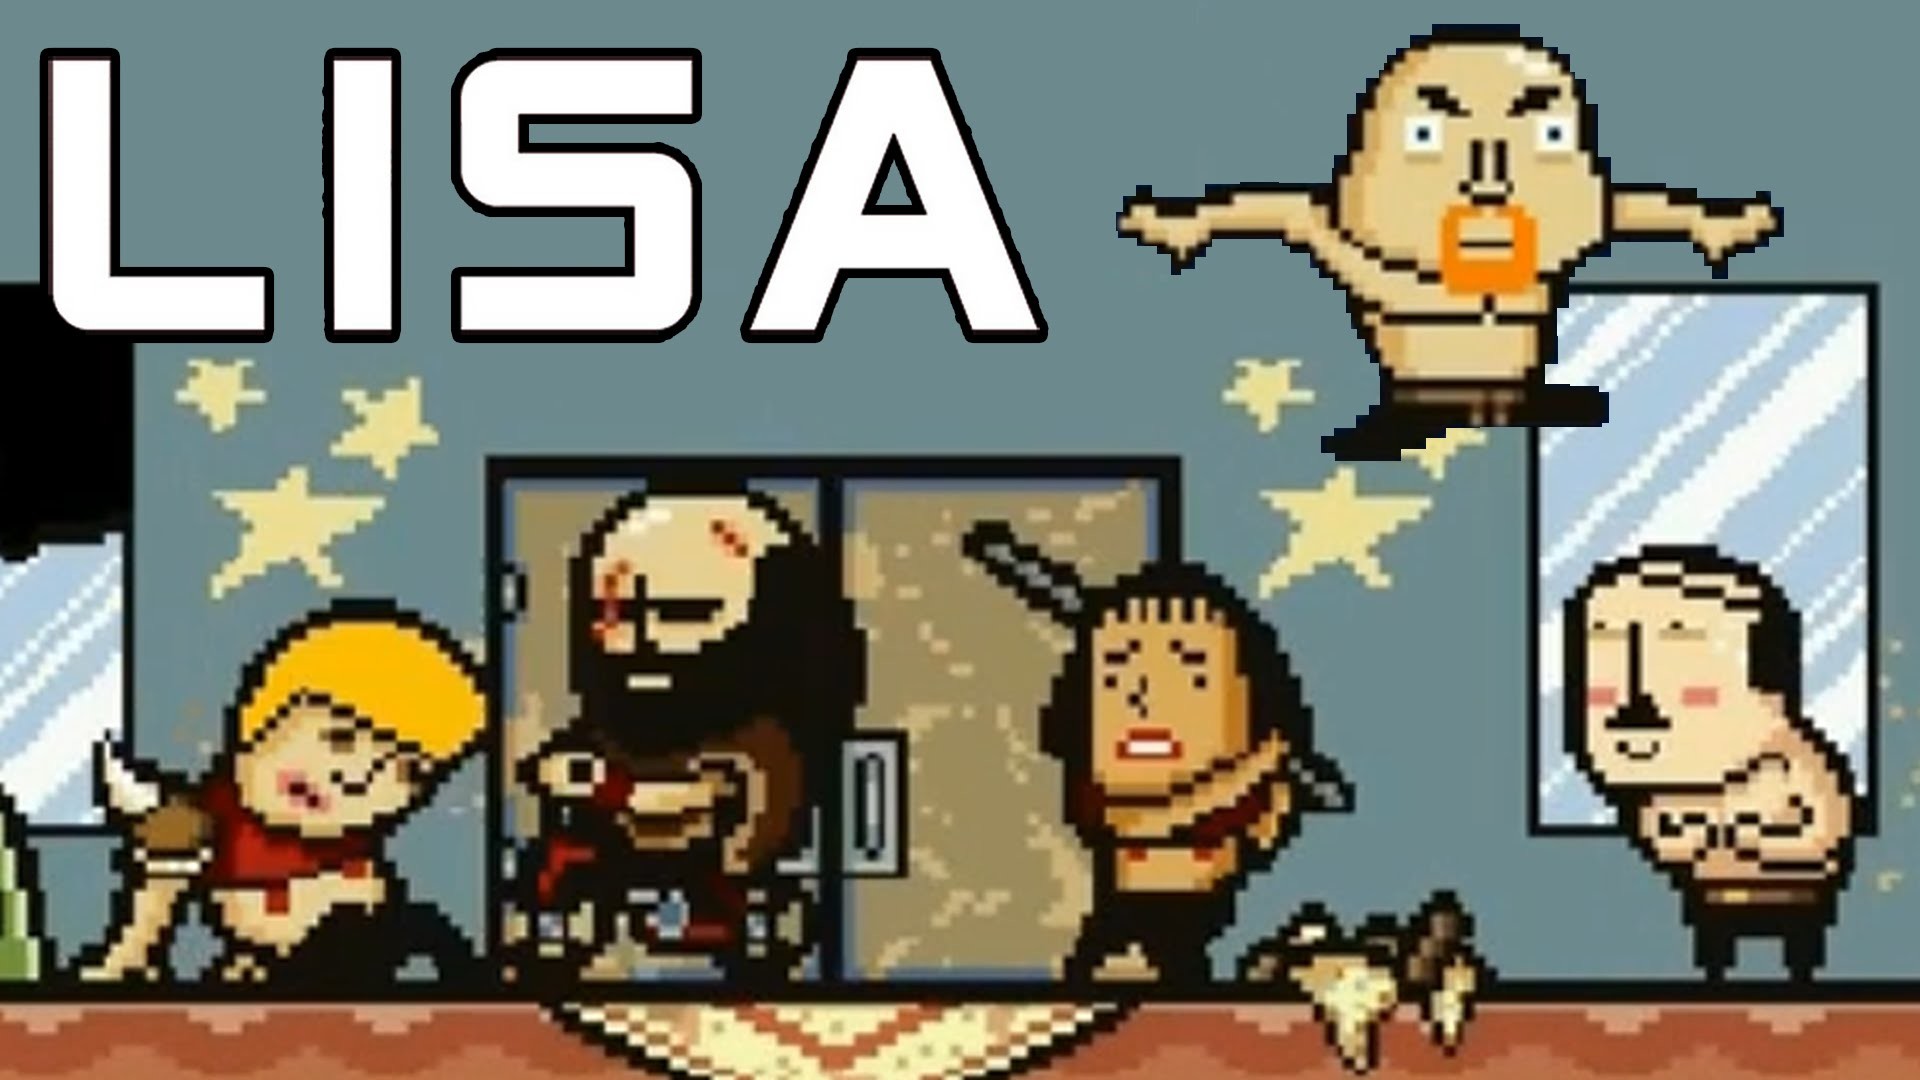 LISA The Painful RPG Part 11 Surprise Kick In The Groin